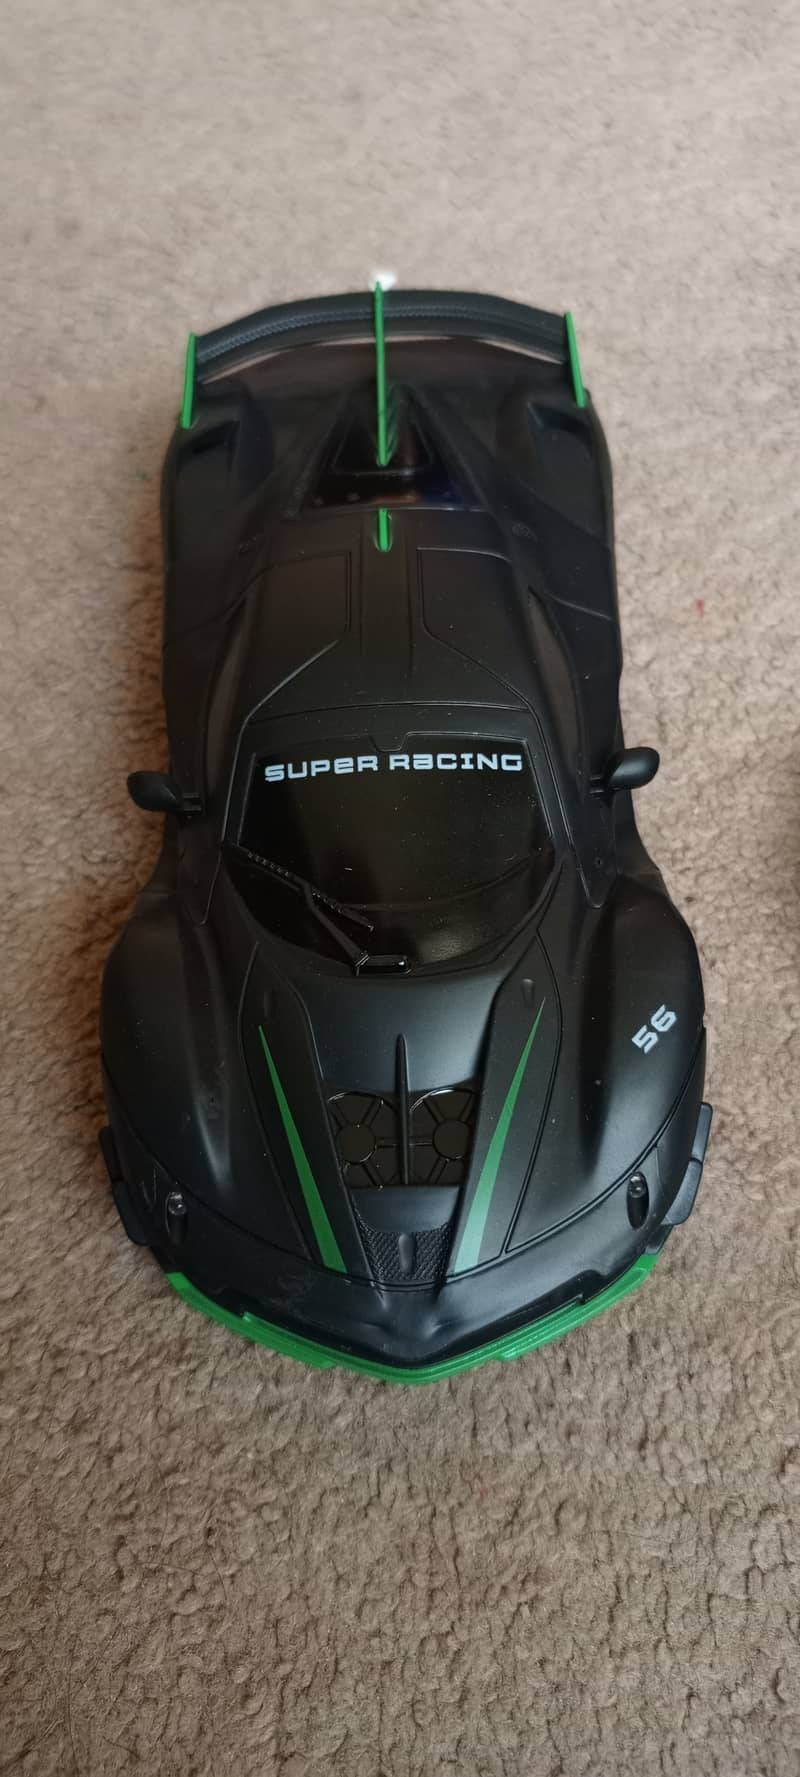 Wireless RC Toy Car for kids 1